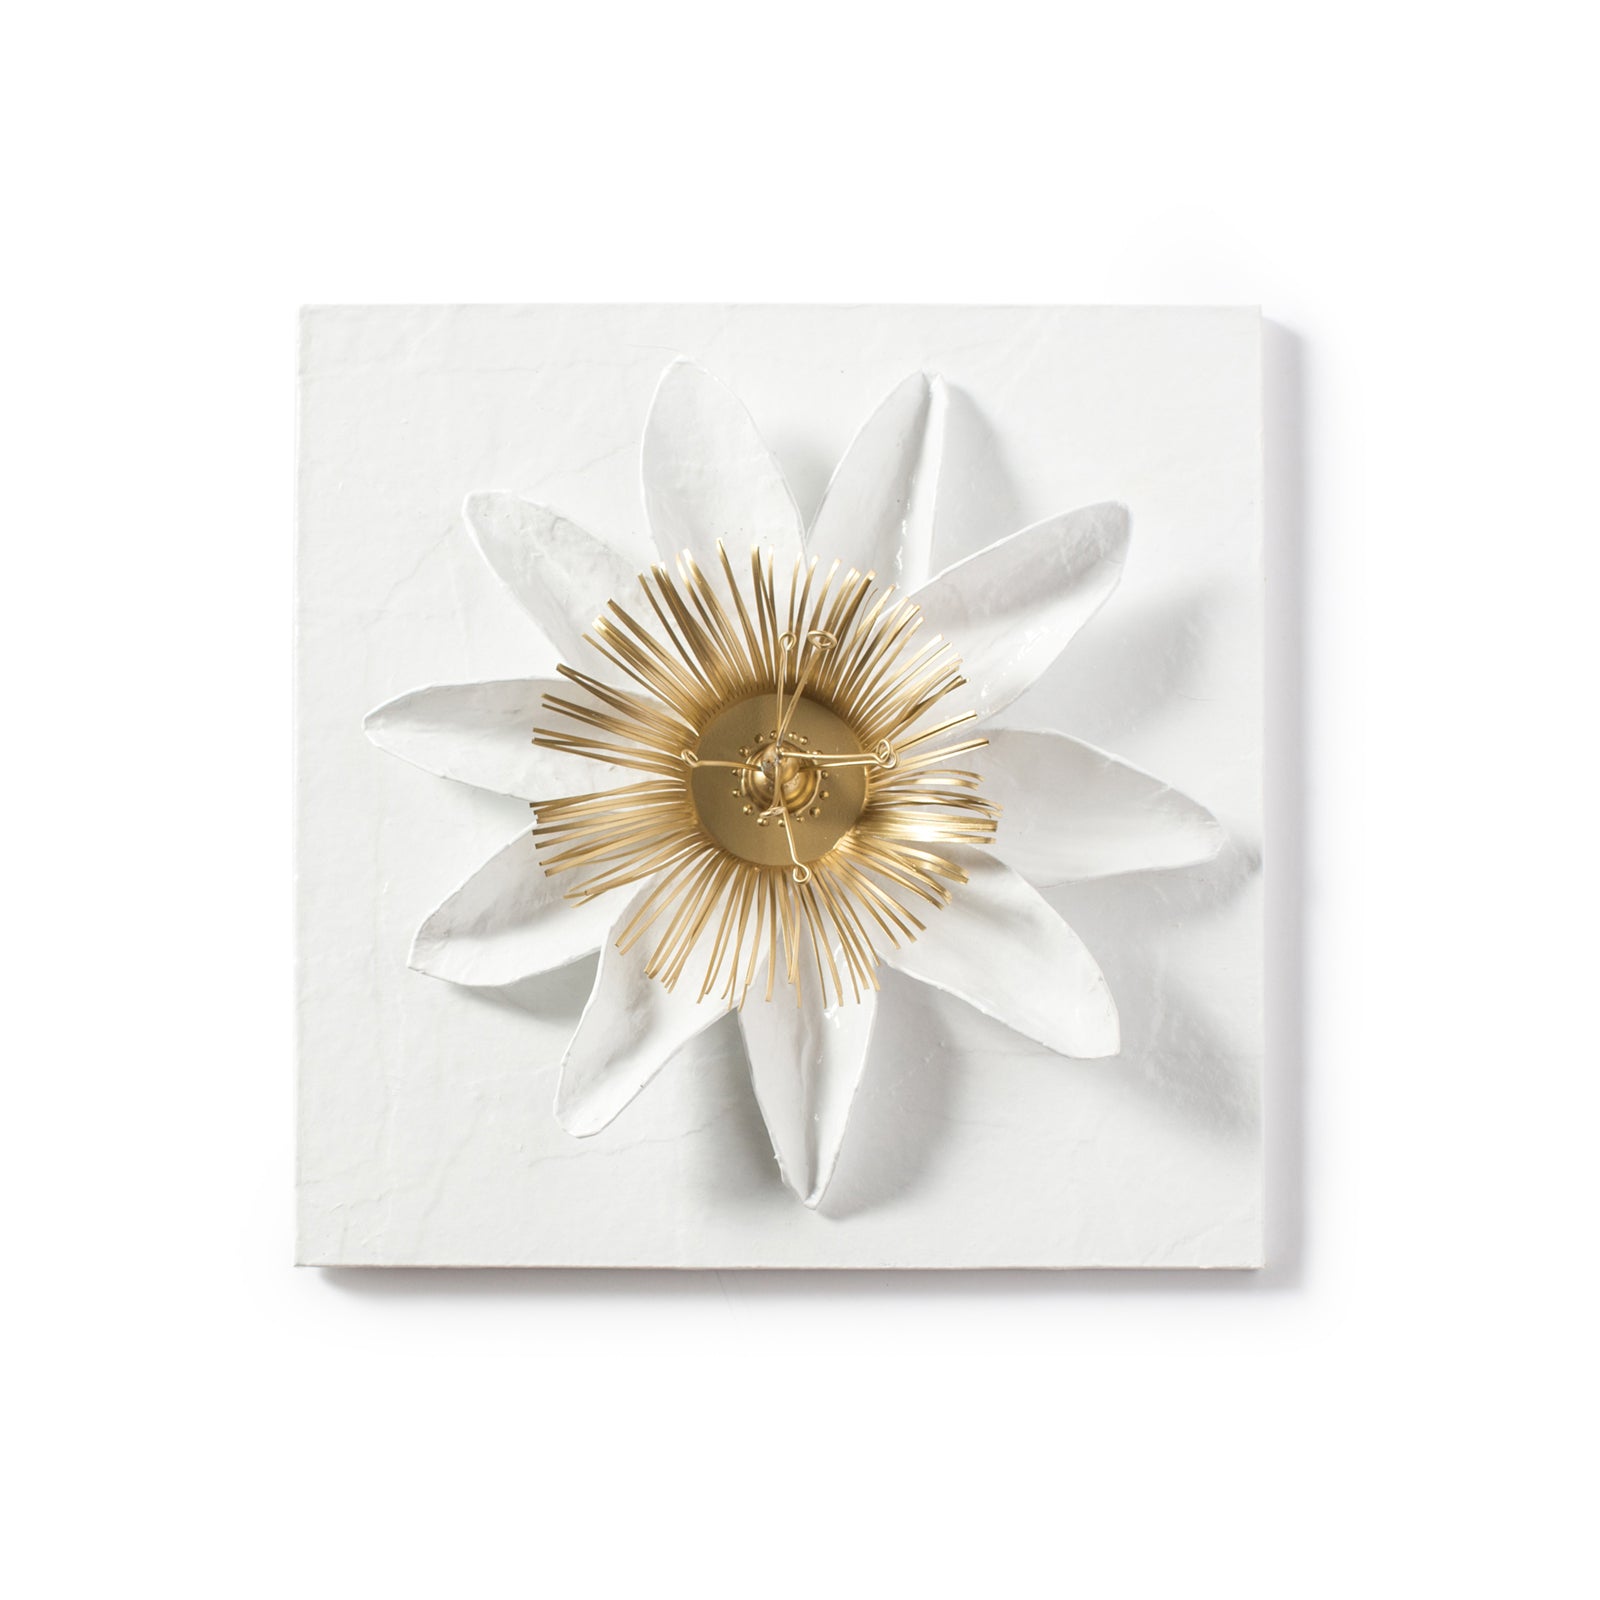 Passion Flower Wall Tile, handmade in Mexico